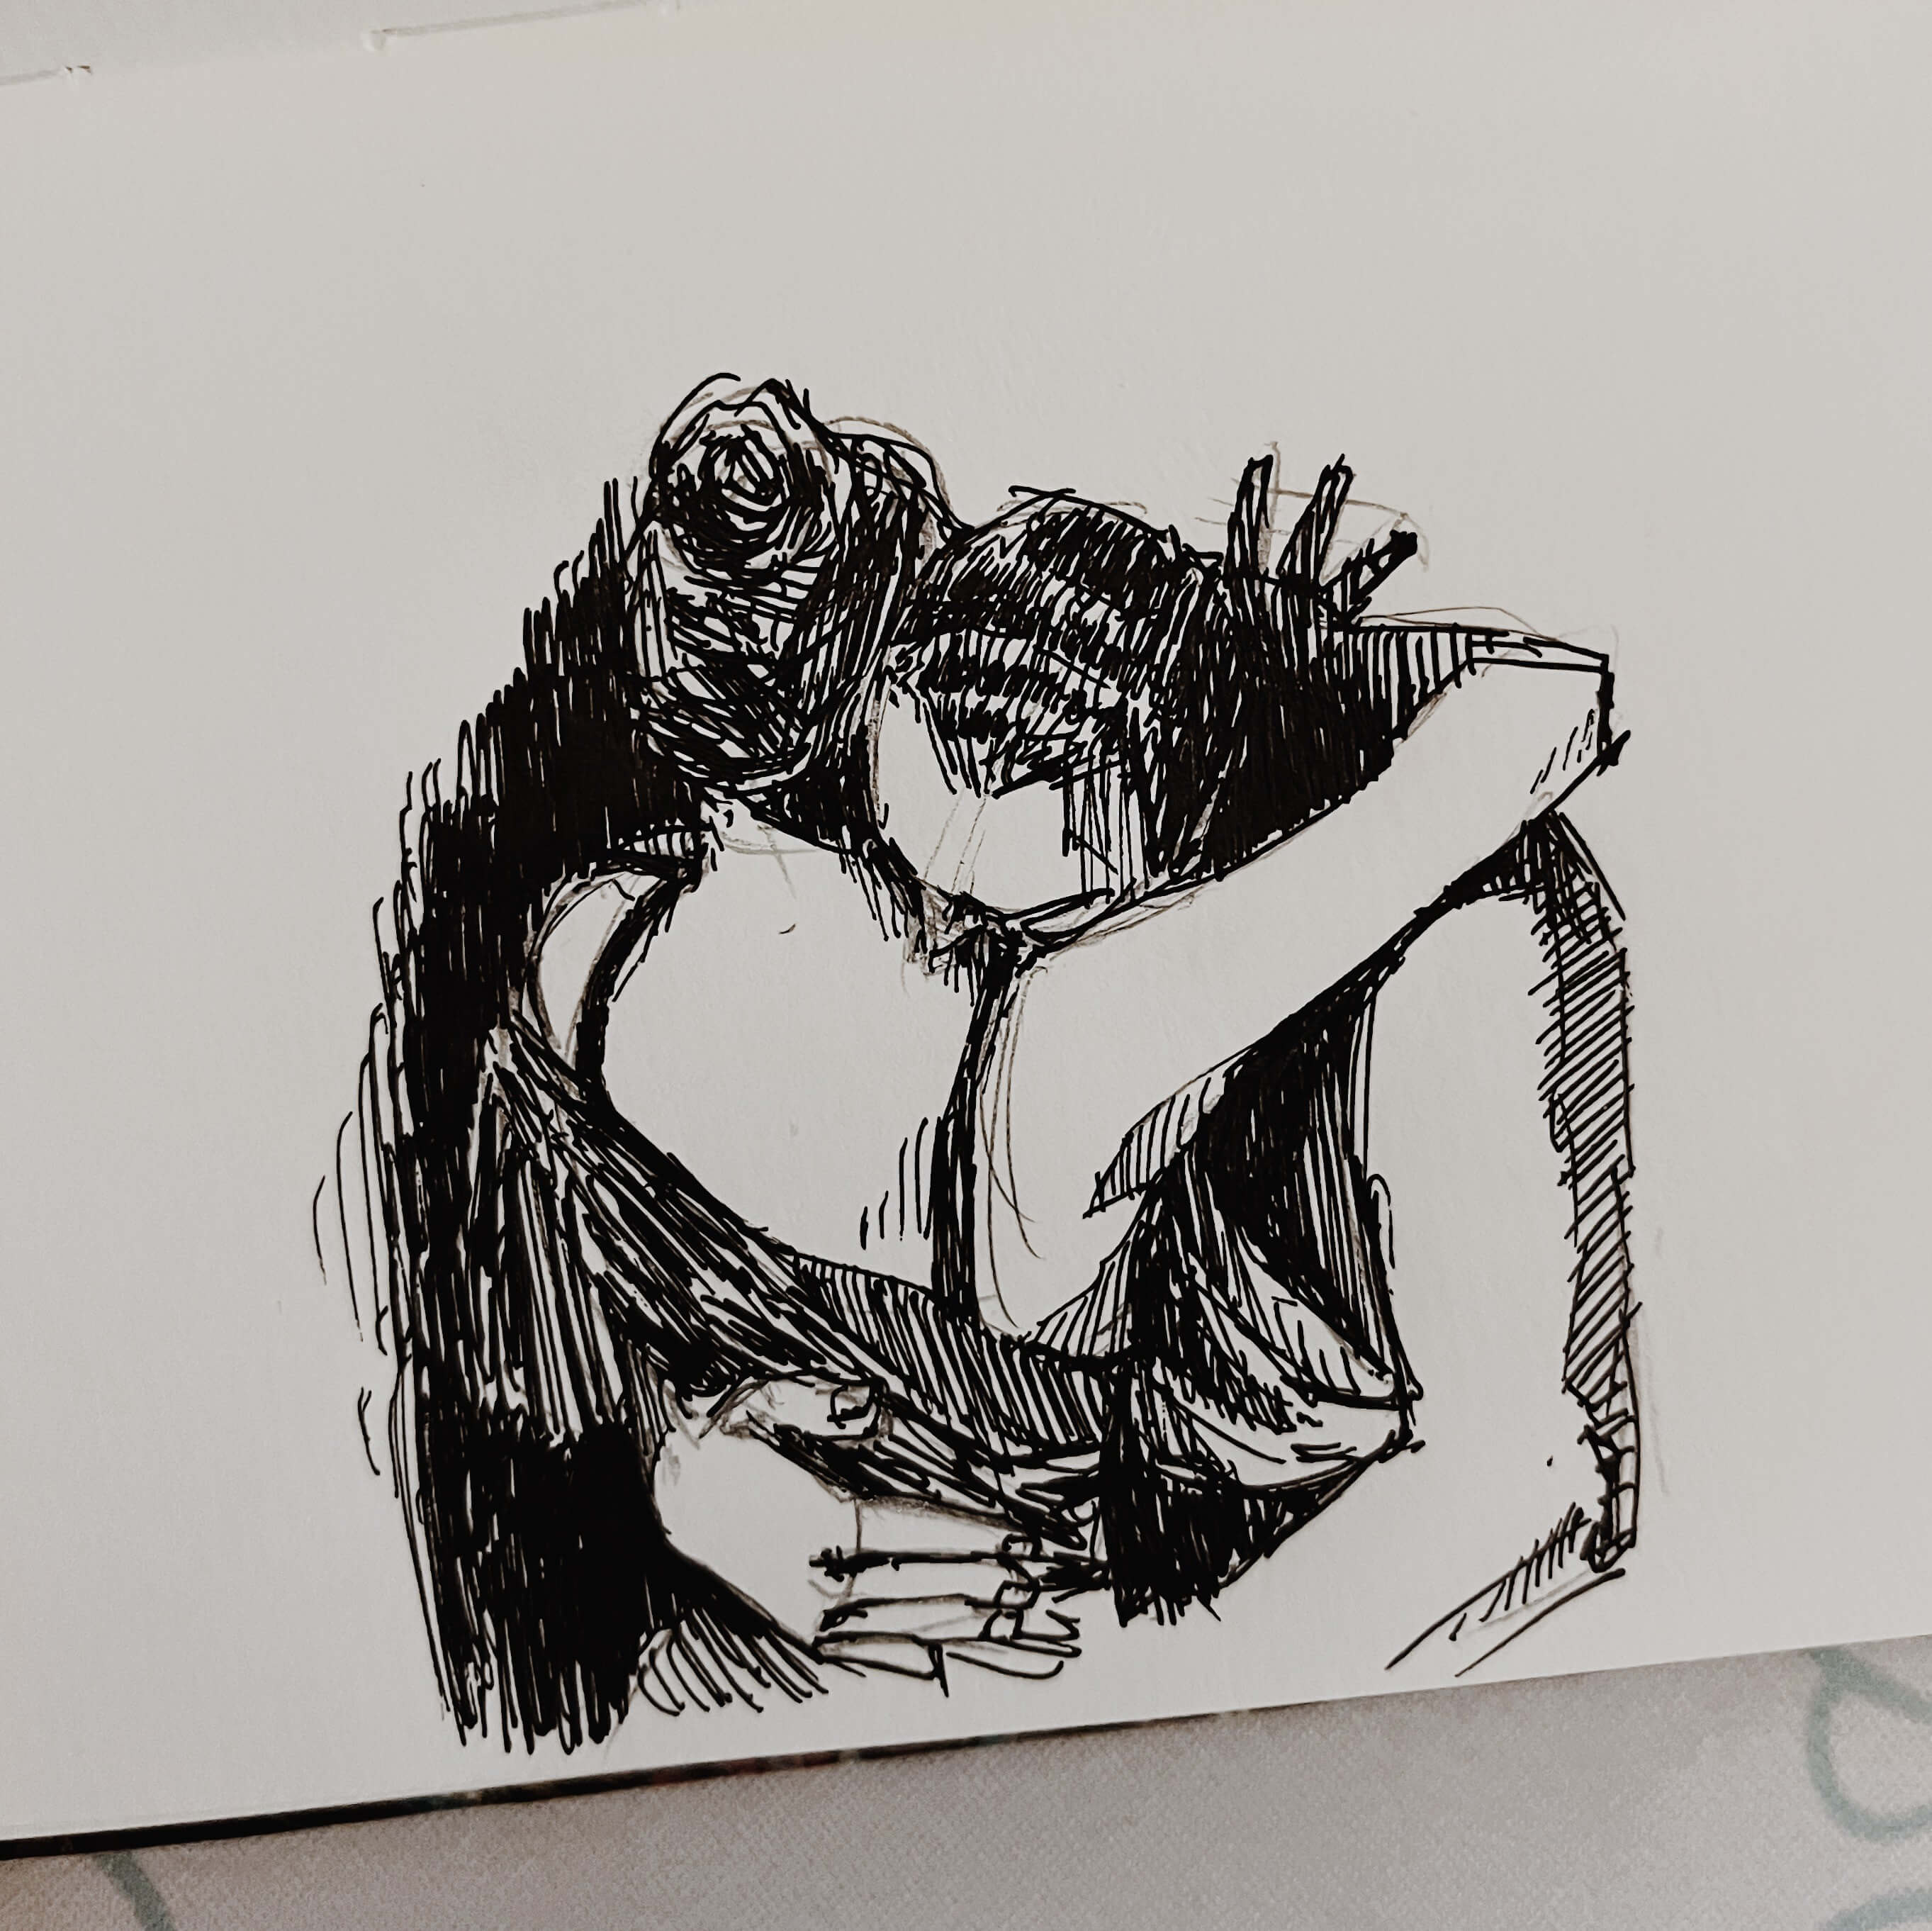 Ink sketch of two dancers embracing during a tango routine. The man has his face pressed into the woman’s shoulder and his hand around her back. 